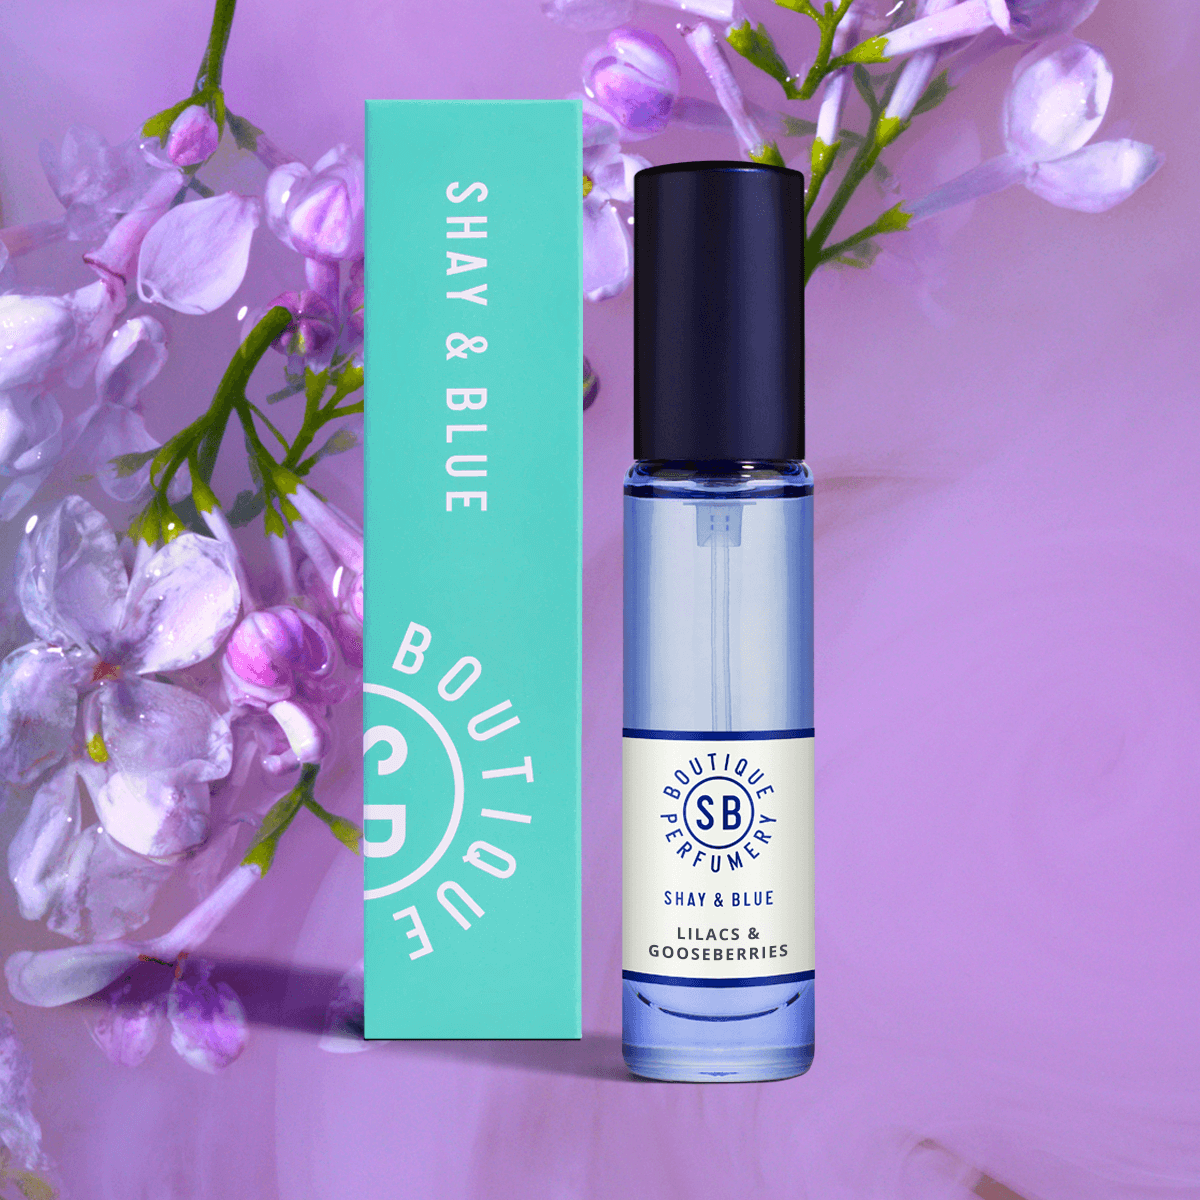 Lilacs & Gooseberries Fragrance 10ml | A twisted and addictive juicy floral. Obsessive Lilacs open to the thrill of dark demons. | Clean All Gender Fragrance | Shay & Blue